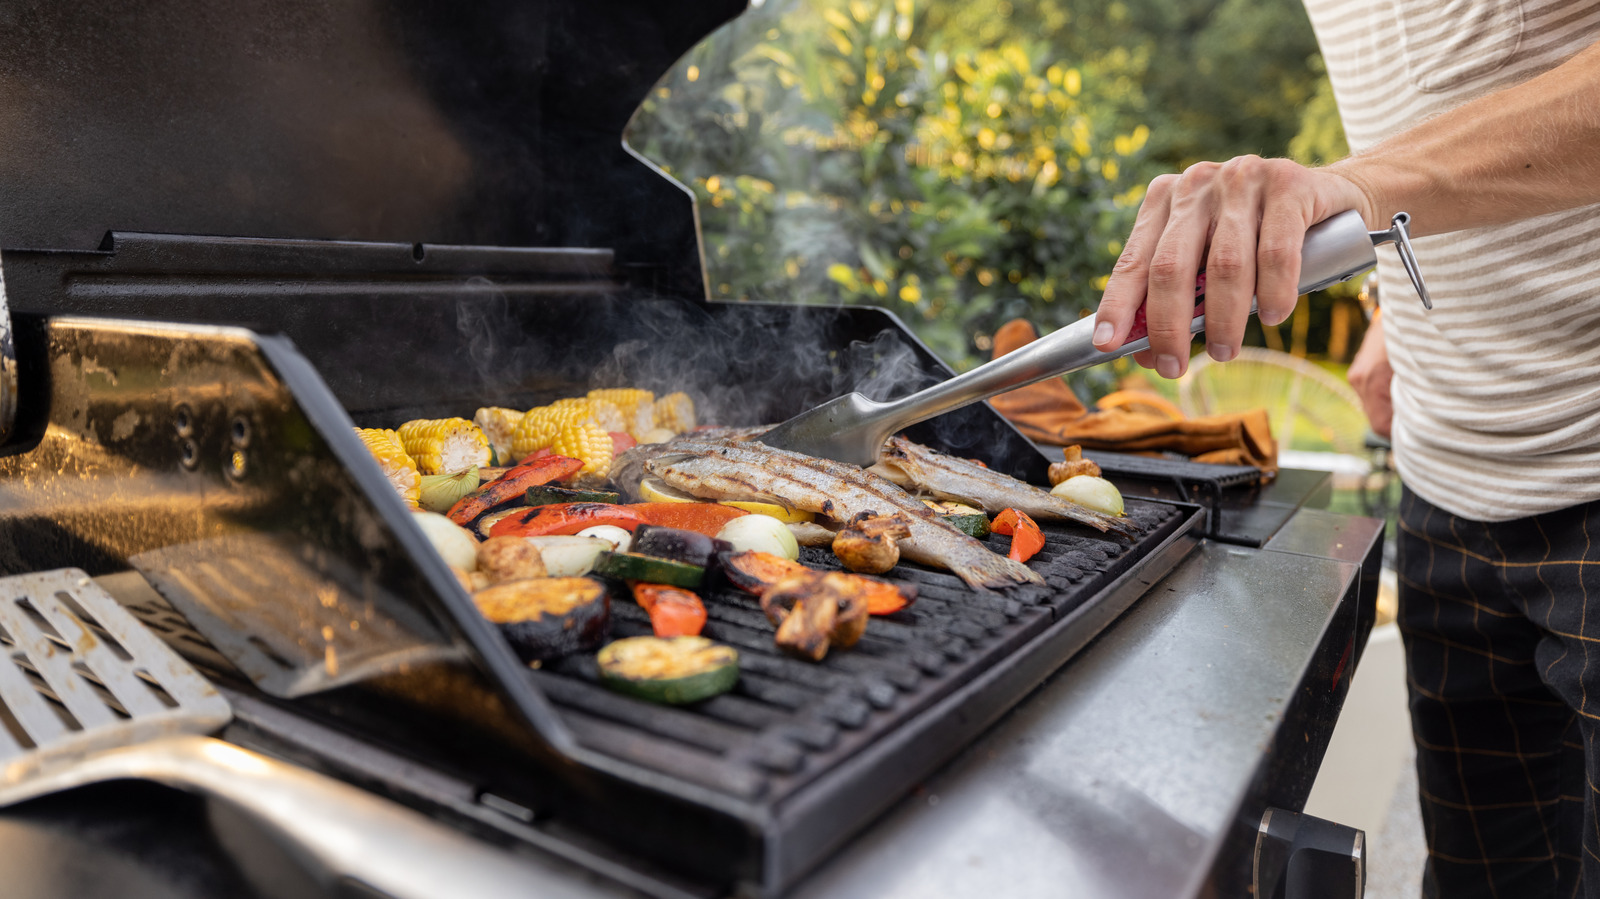 Costco on Instagram: “Grill anything right from your stovetop